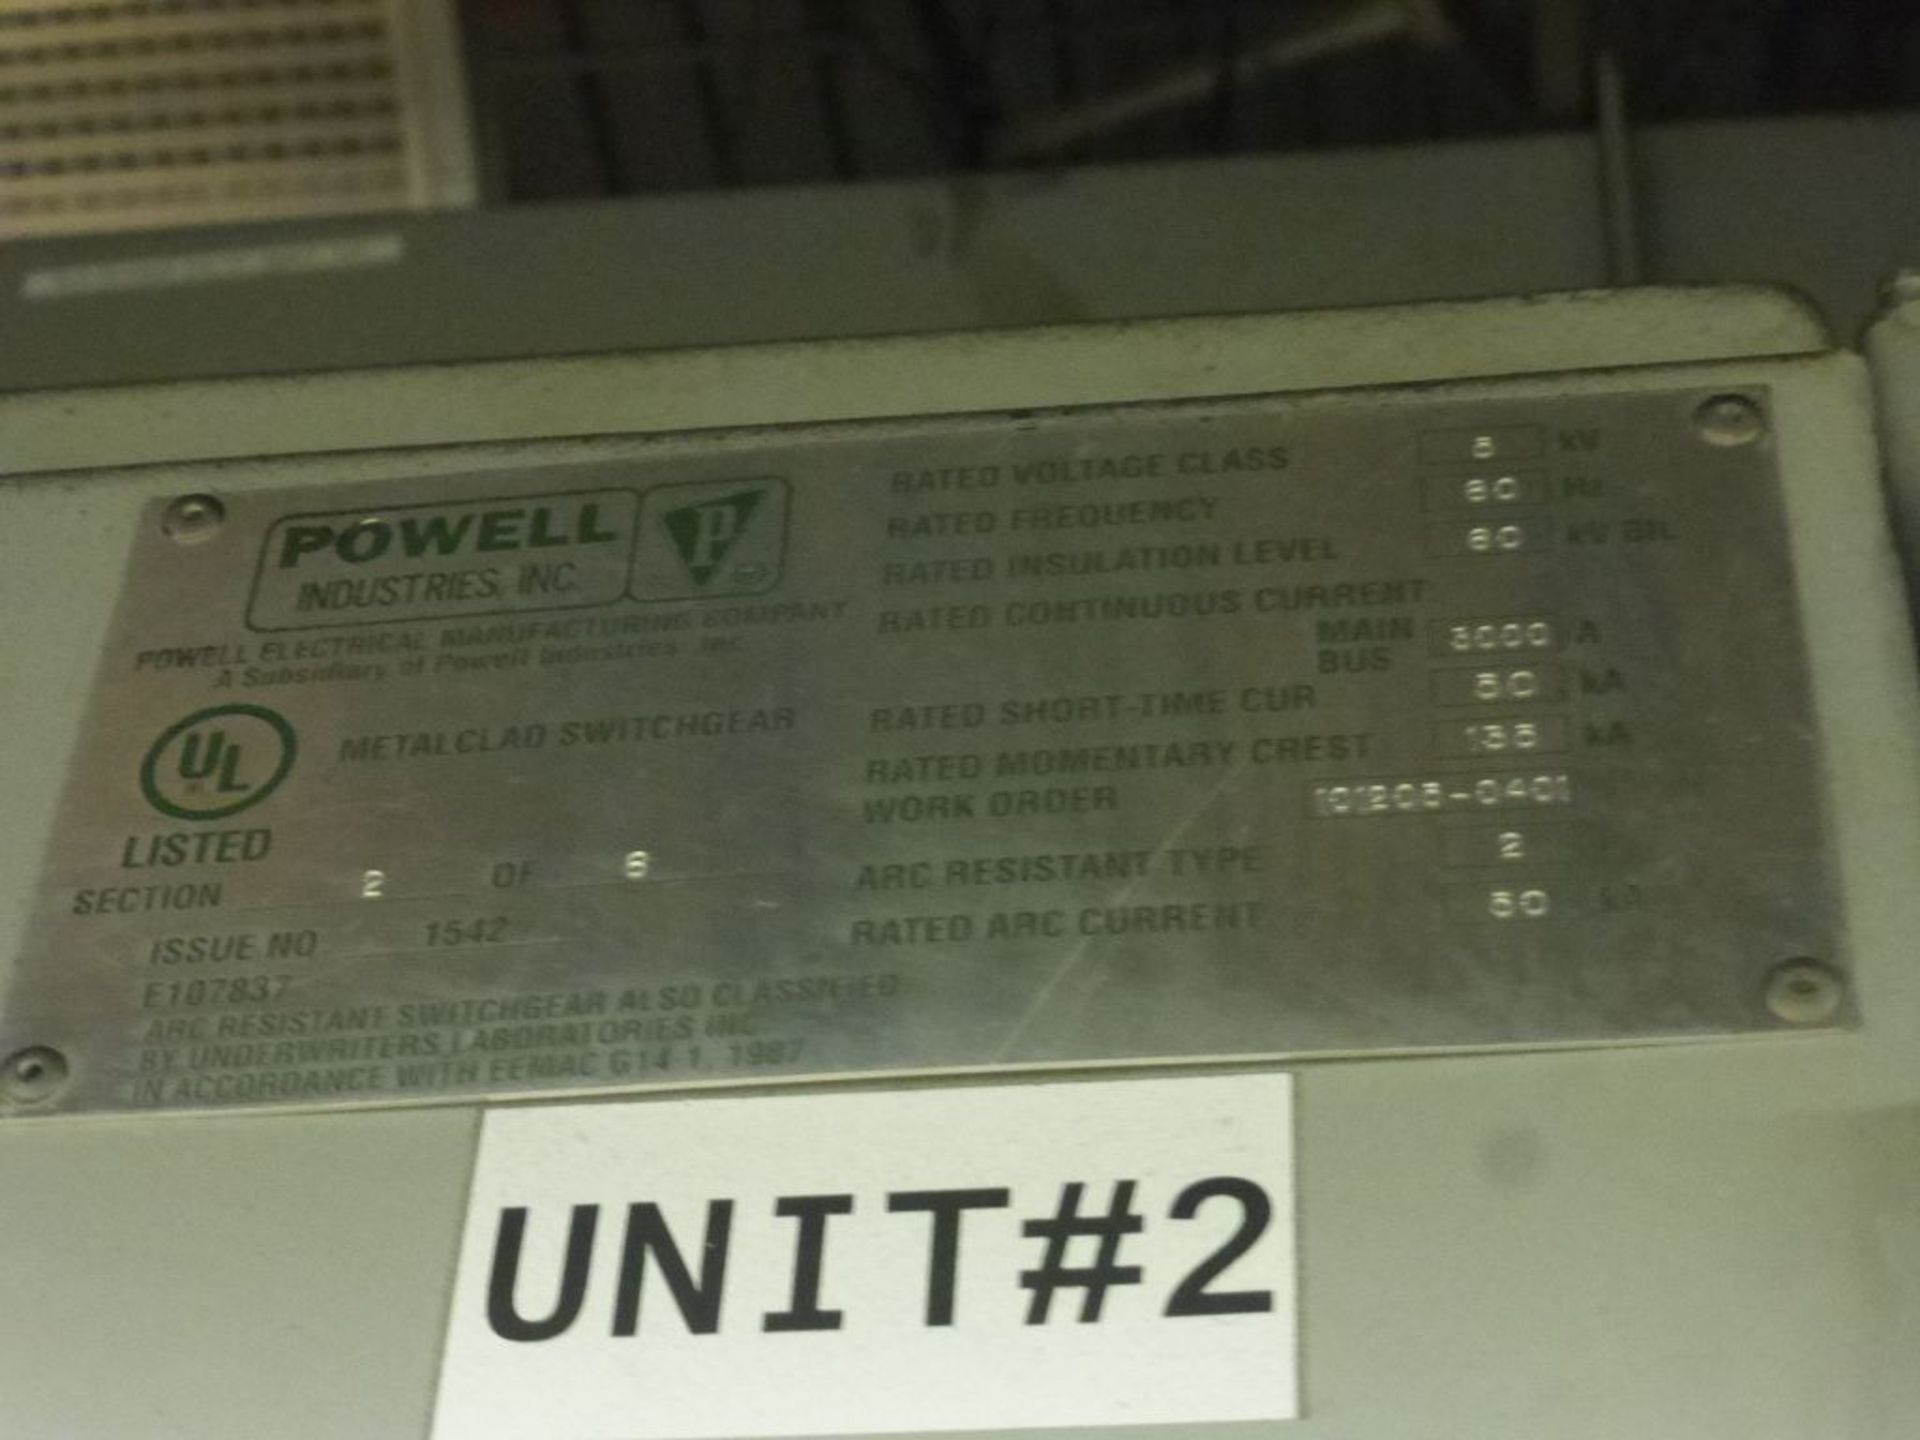 Powell 3000A Arc Resistant MV Metal Clad Switchgear - Image 14 of 68